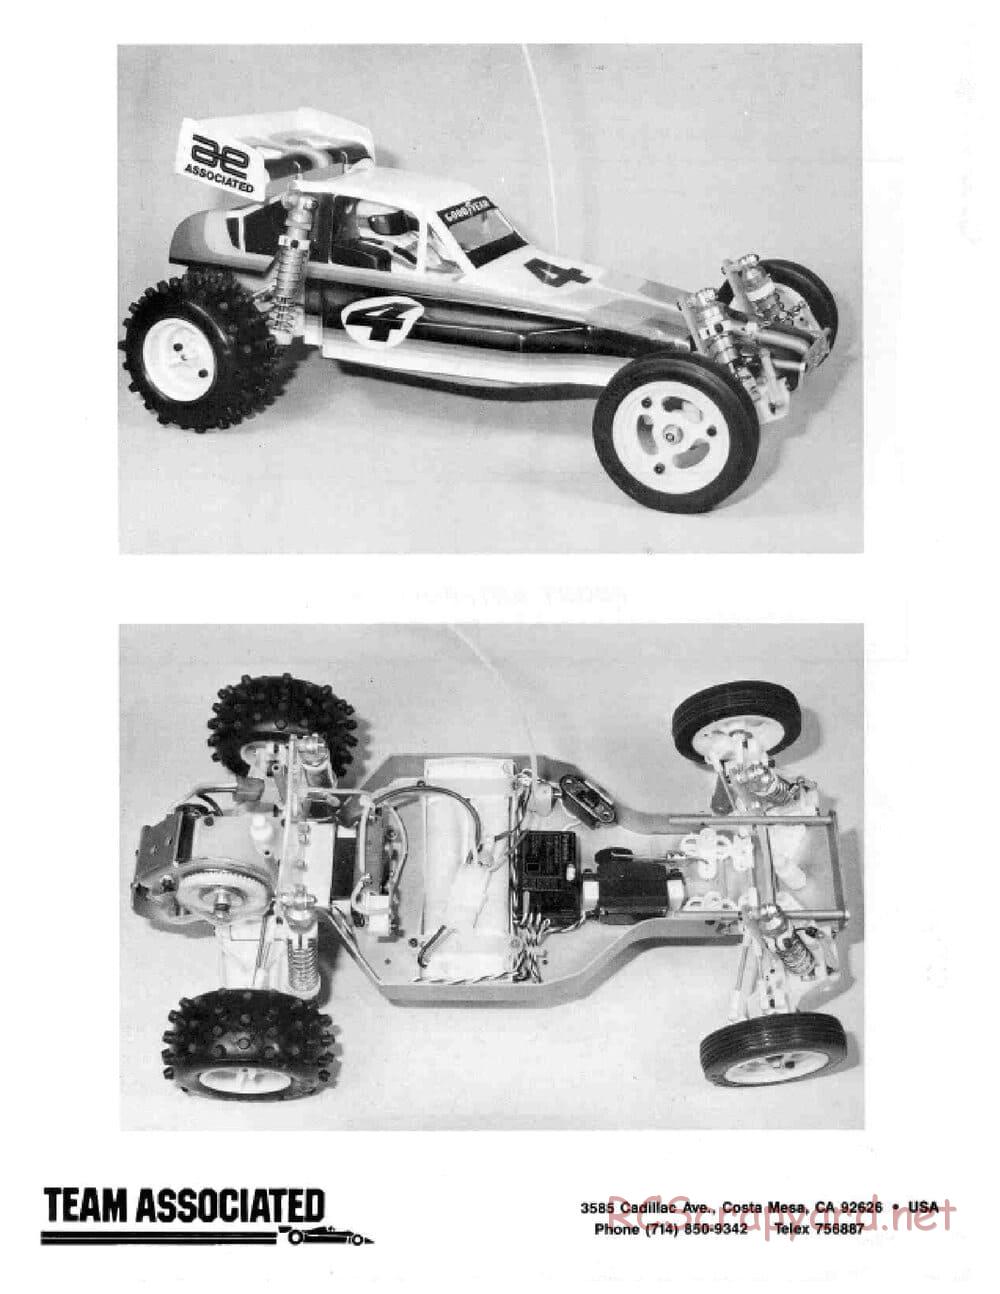 Team Associated - RC10 - 1986 Cadillac Manual - Page 68